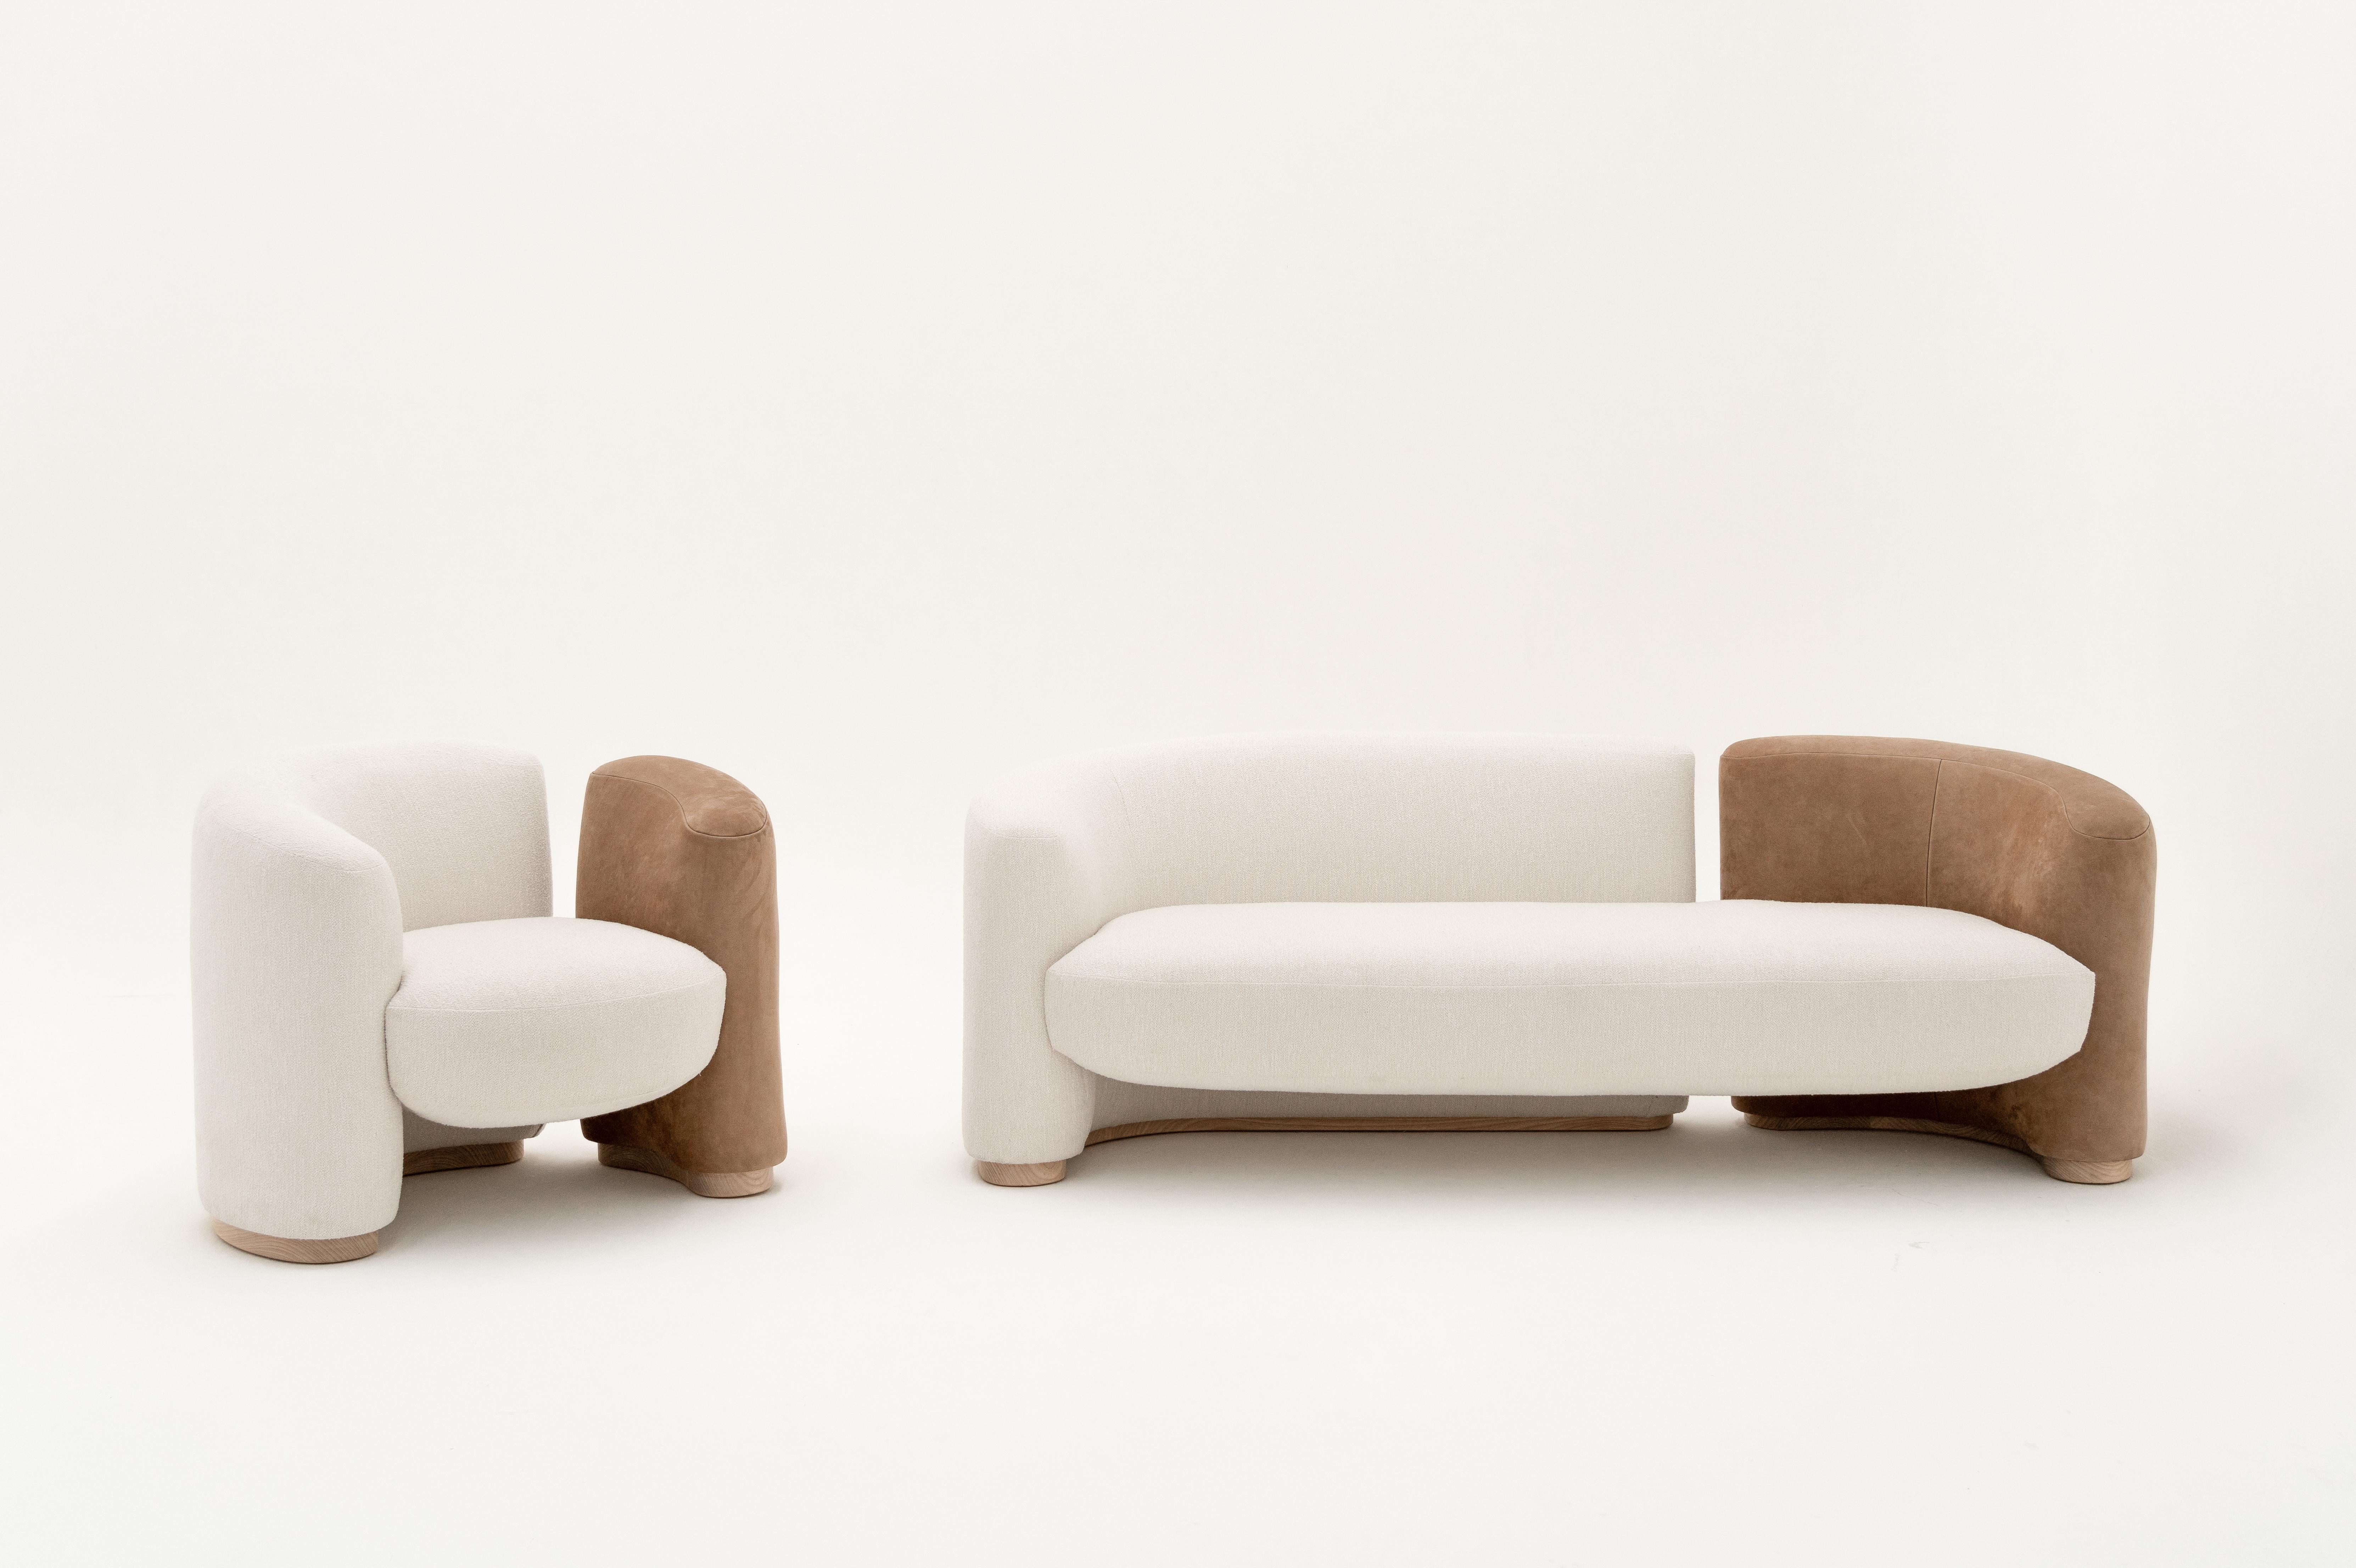 A conversational loveseat built by a unique assembly process of three separate elements, with a subtle visual effect intended to create a classic, but infinitely bold piece. Ad Hoc got inspired by the elegance and silhouette of the famous Mexican